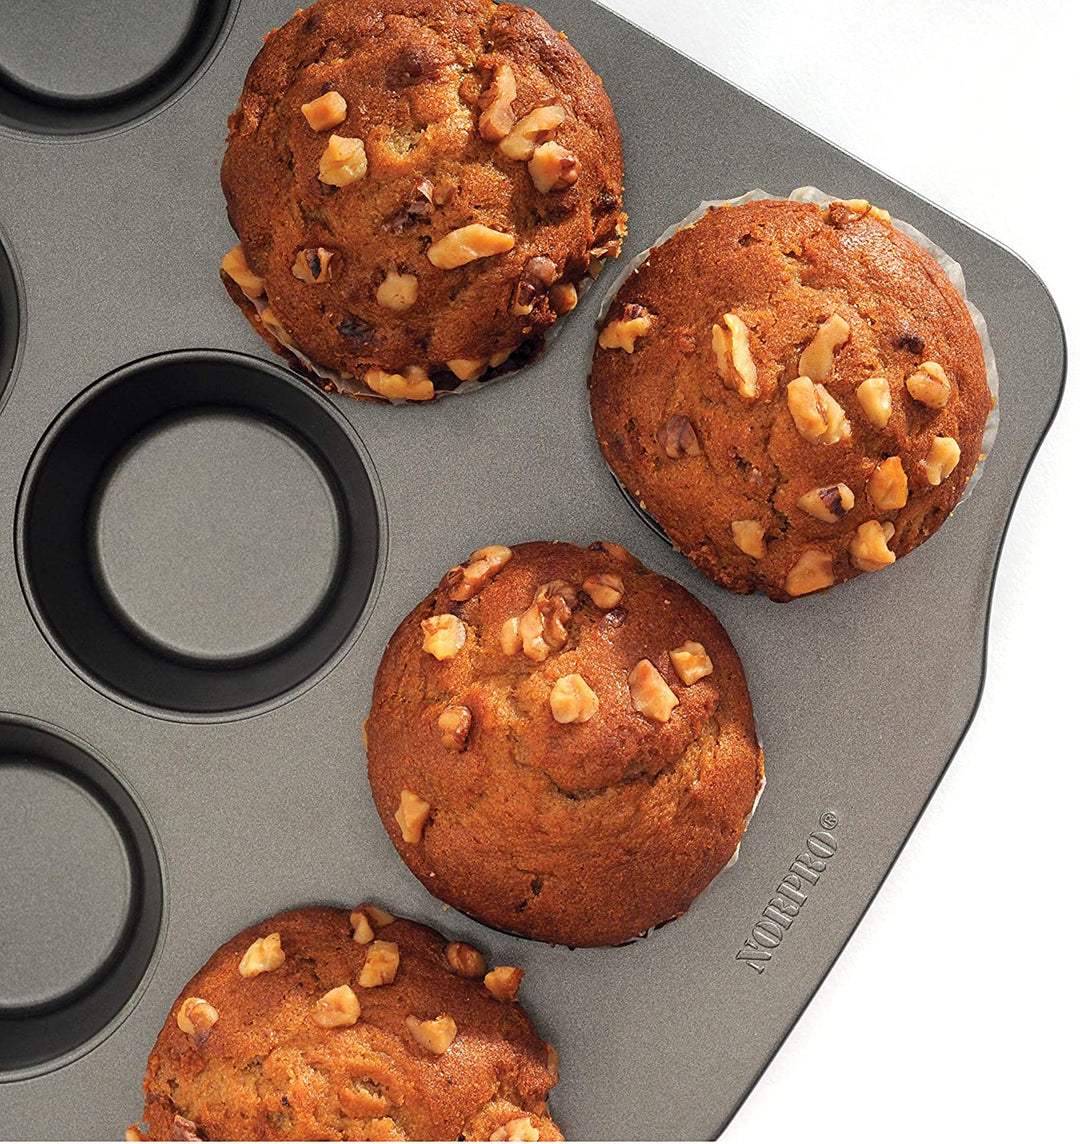 6 Cup Silicone Jumbo Muffin Pan Giant Silicone Cupcake Pan/Cups Deep  Popover Pan Large Muffin